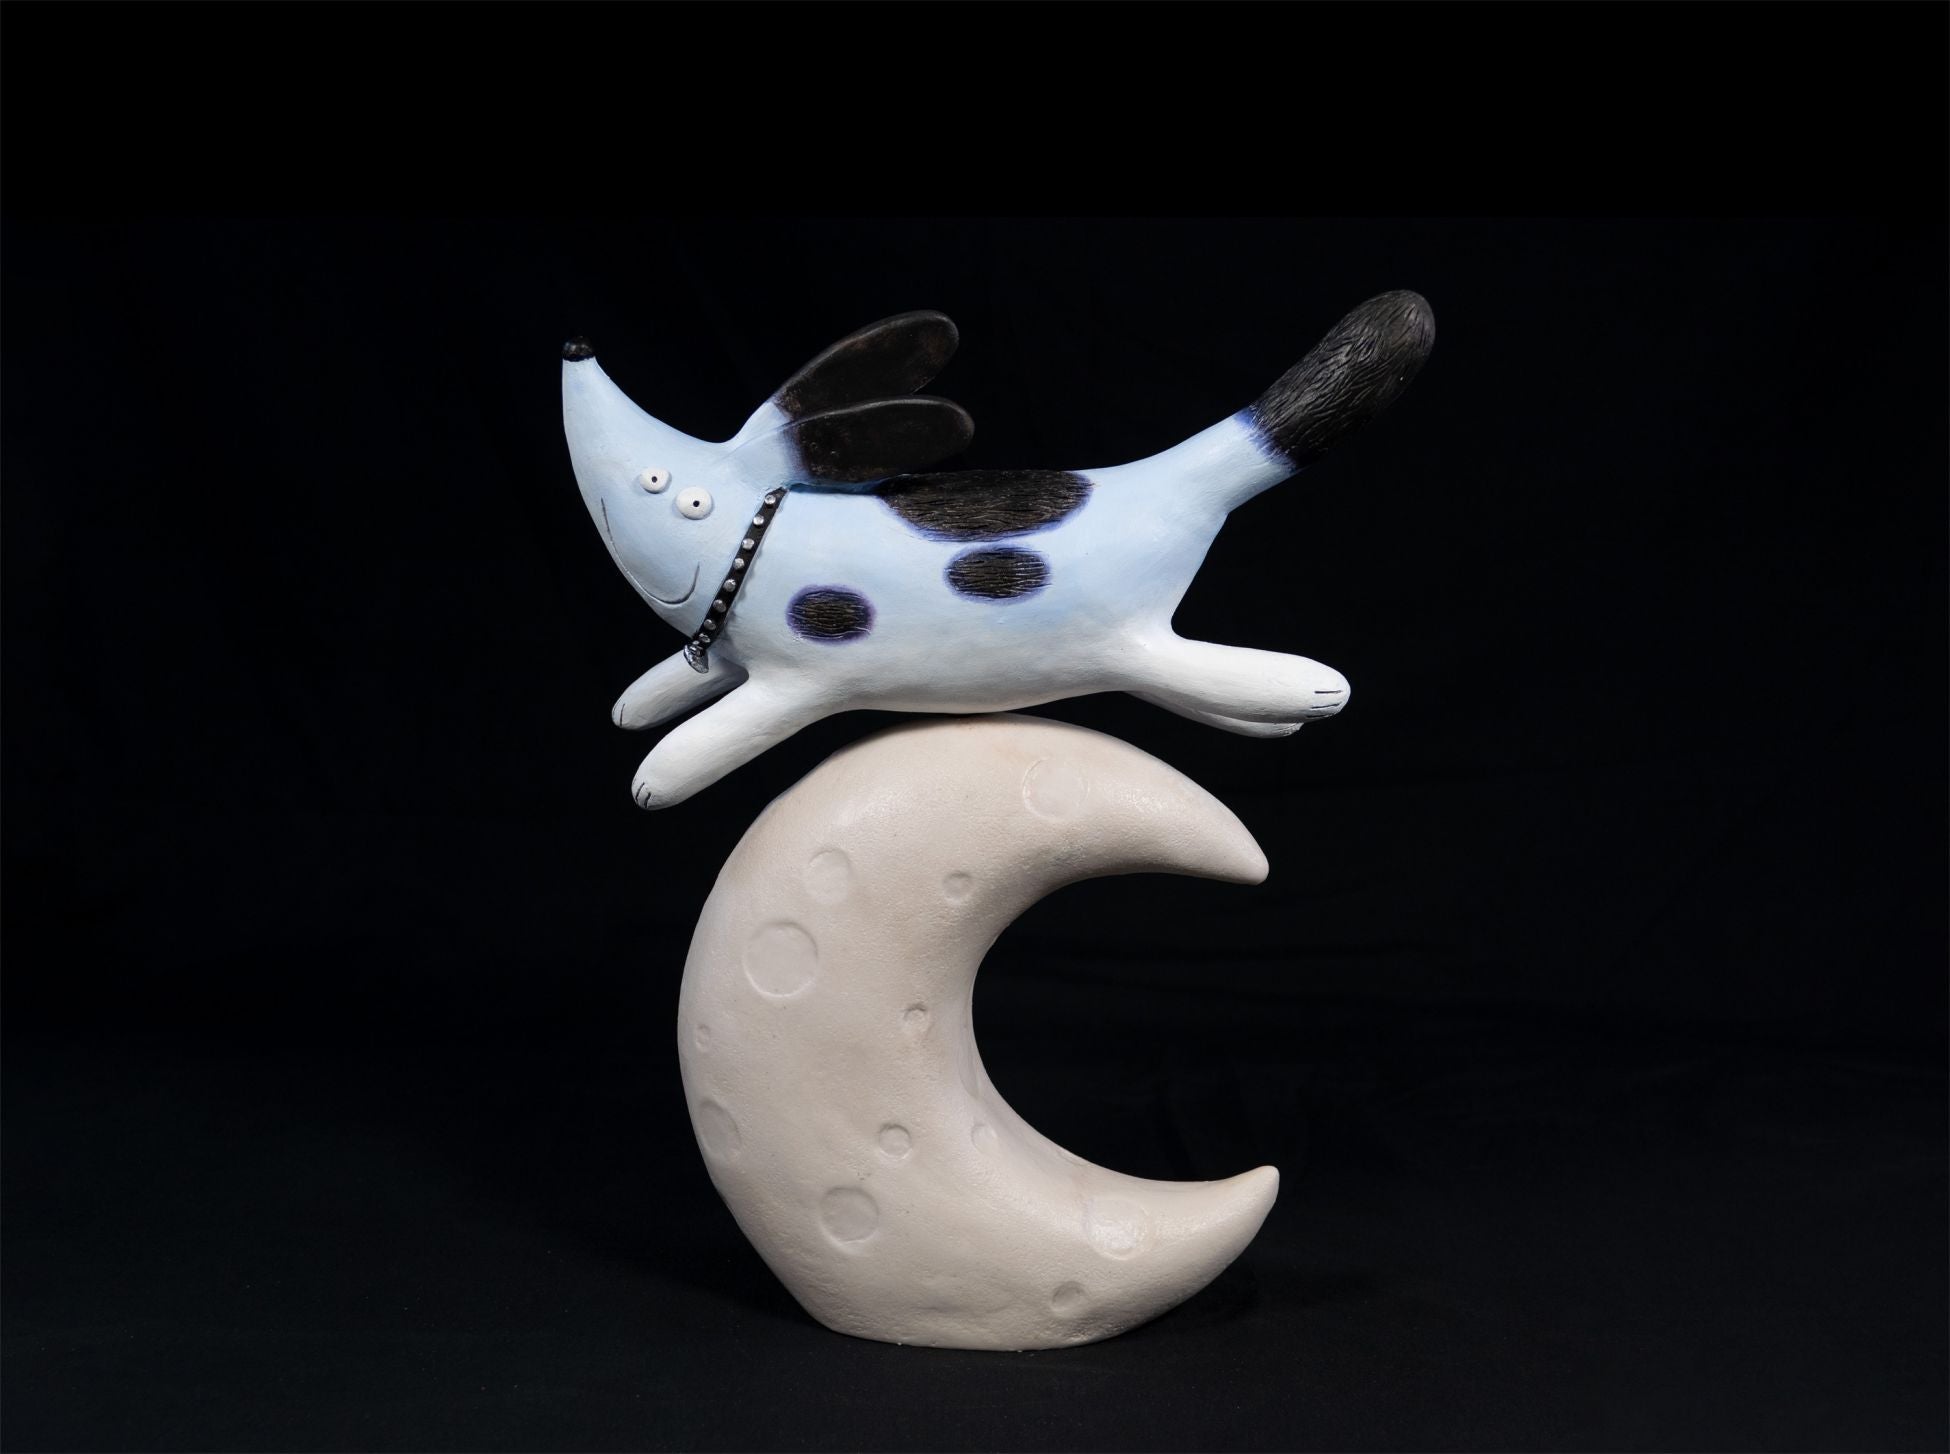 Ryder - 'Over The Moon' - Limited Edition Sculpture